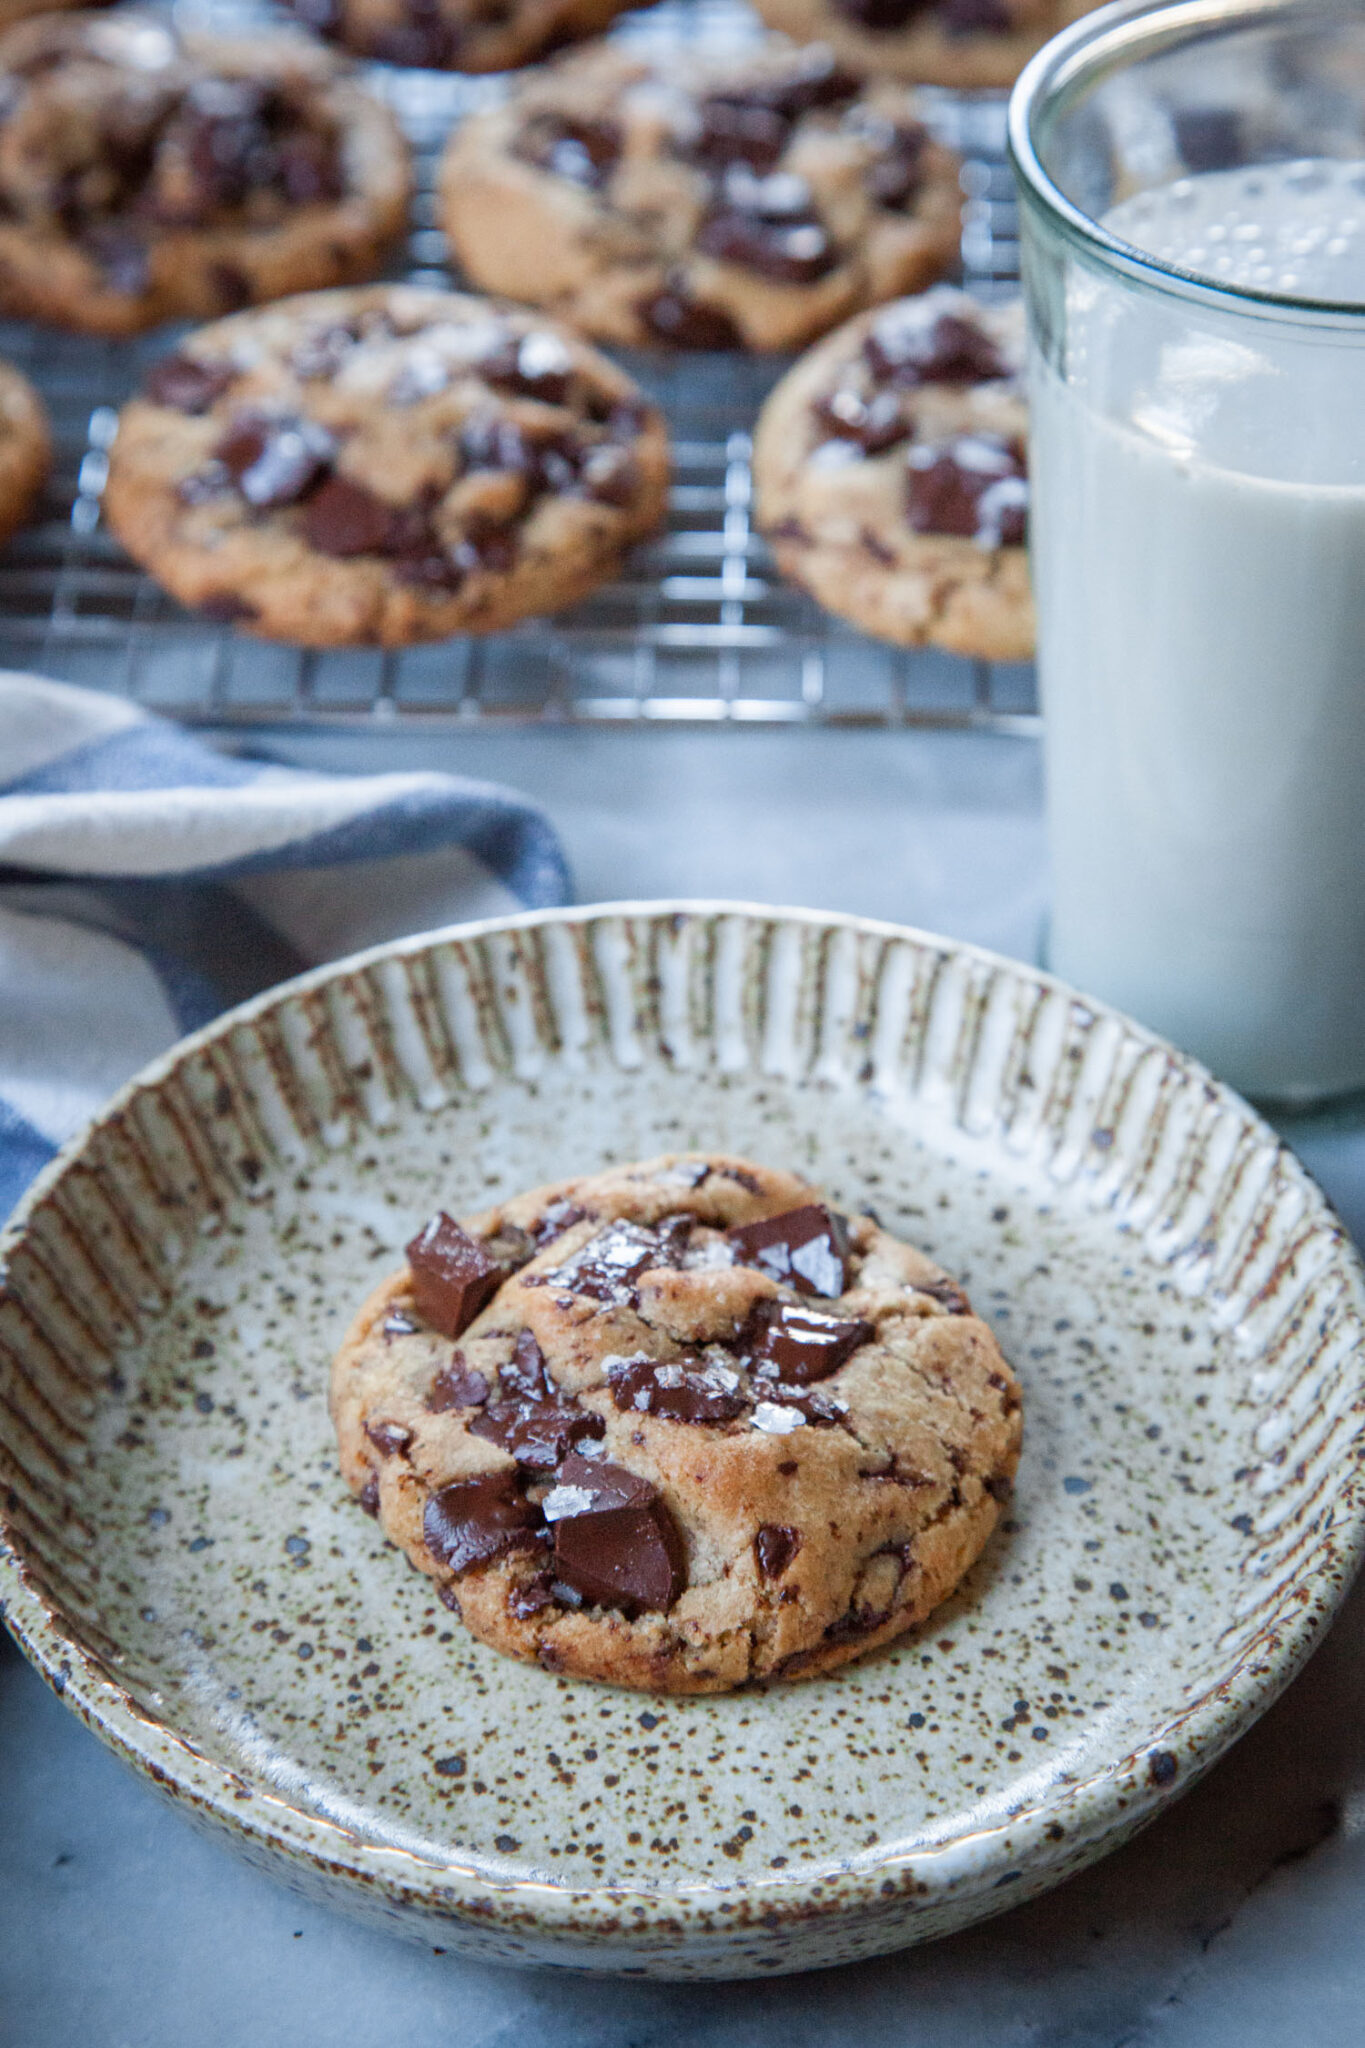 An extra virgin olive oil chocolate chip cookie on a plate, with a glass of milk next to it and more cookies on a wire rack near by.